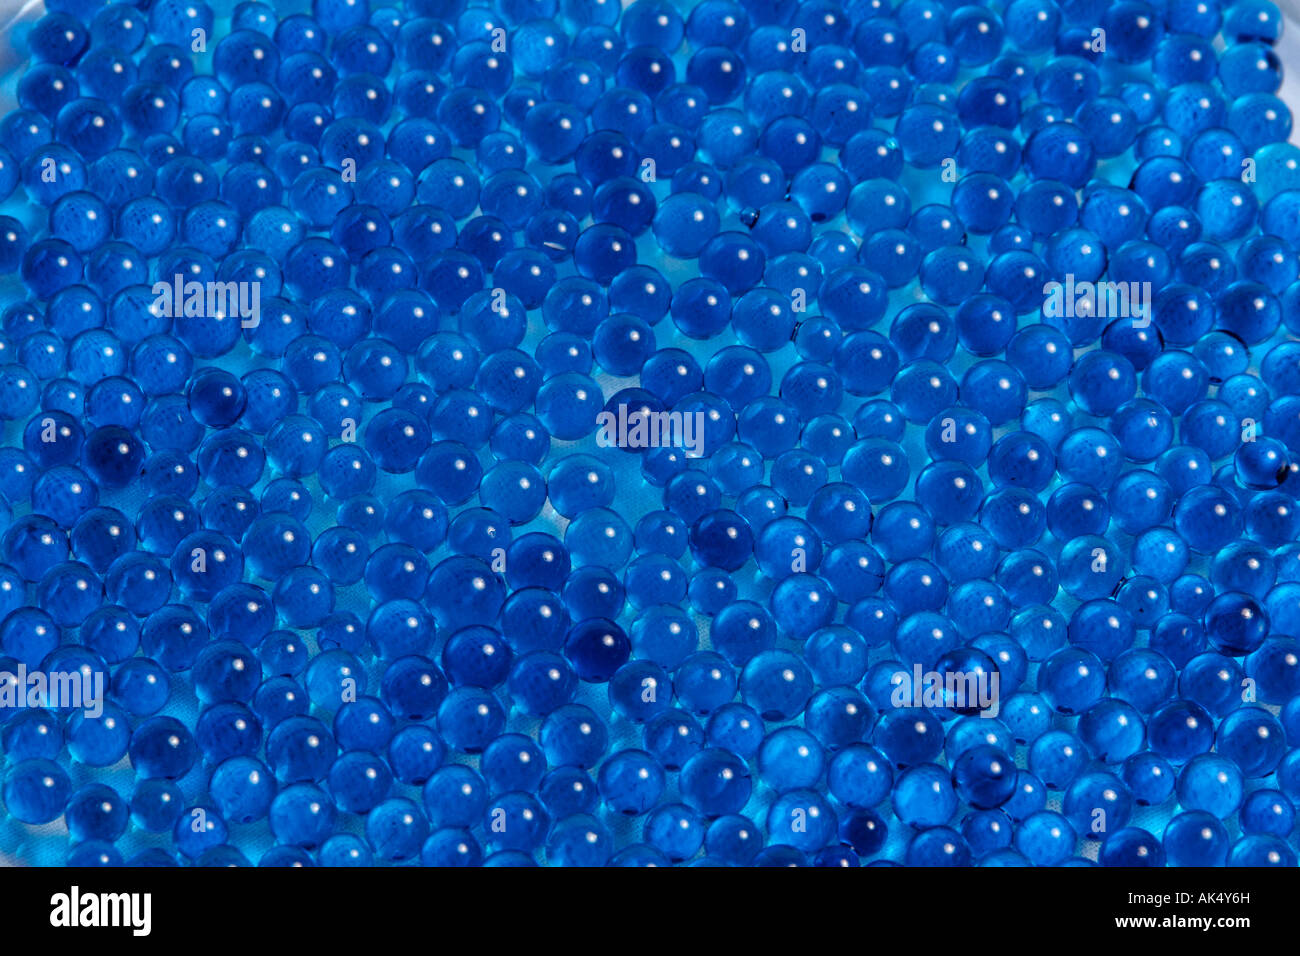 Blue balls arranged in a pattern Stock Photo